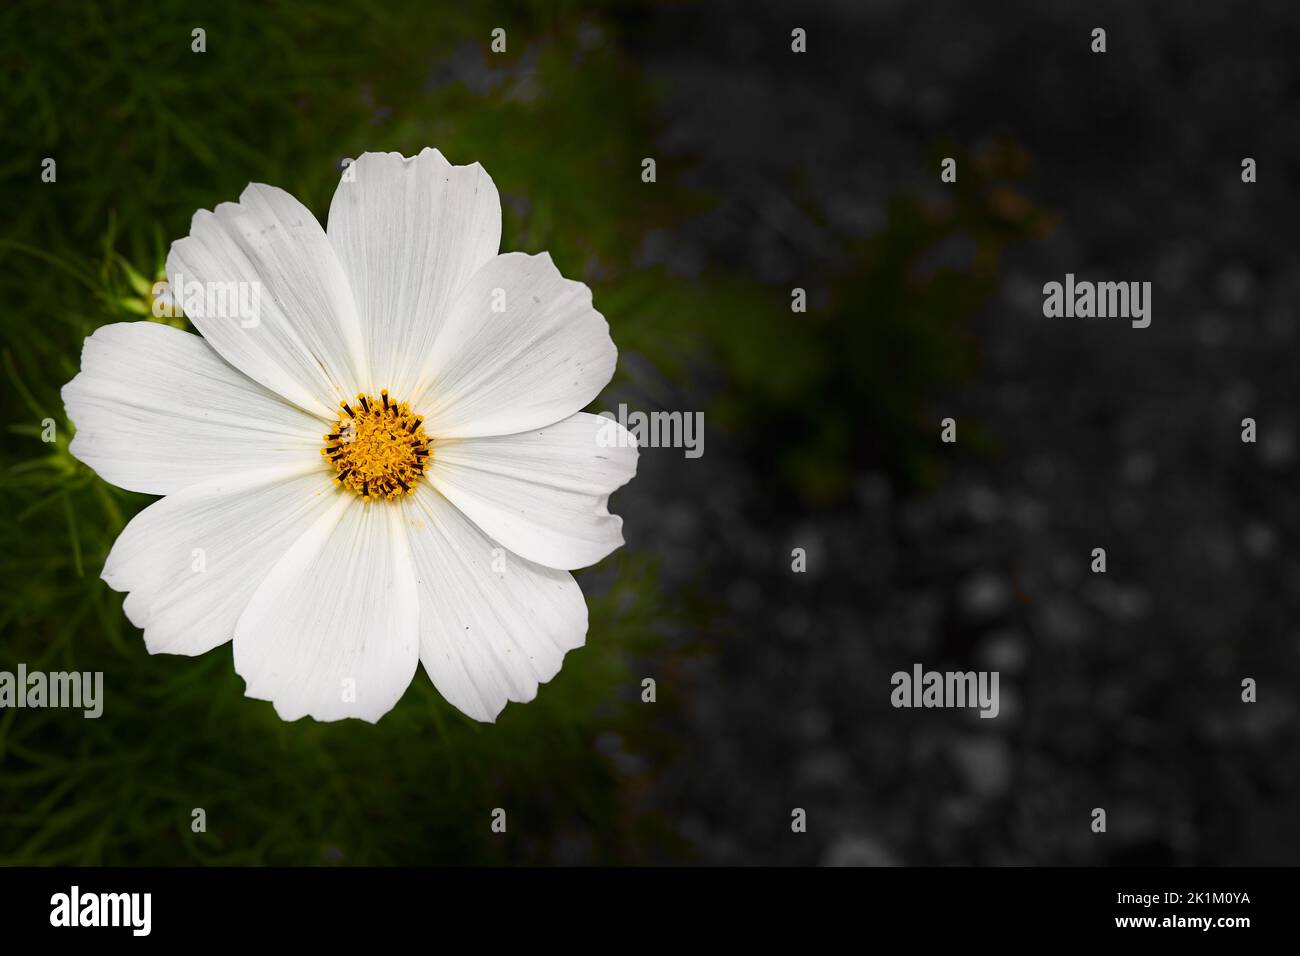 Textured white petals surround the orange core of the cosmos bipinnatus, or purity flower, a member of the asteraceae family. Stock Photo